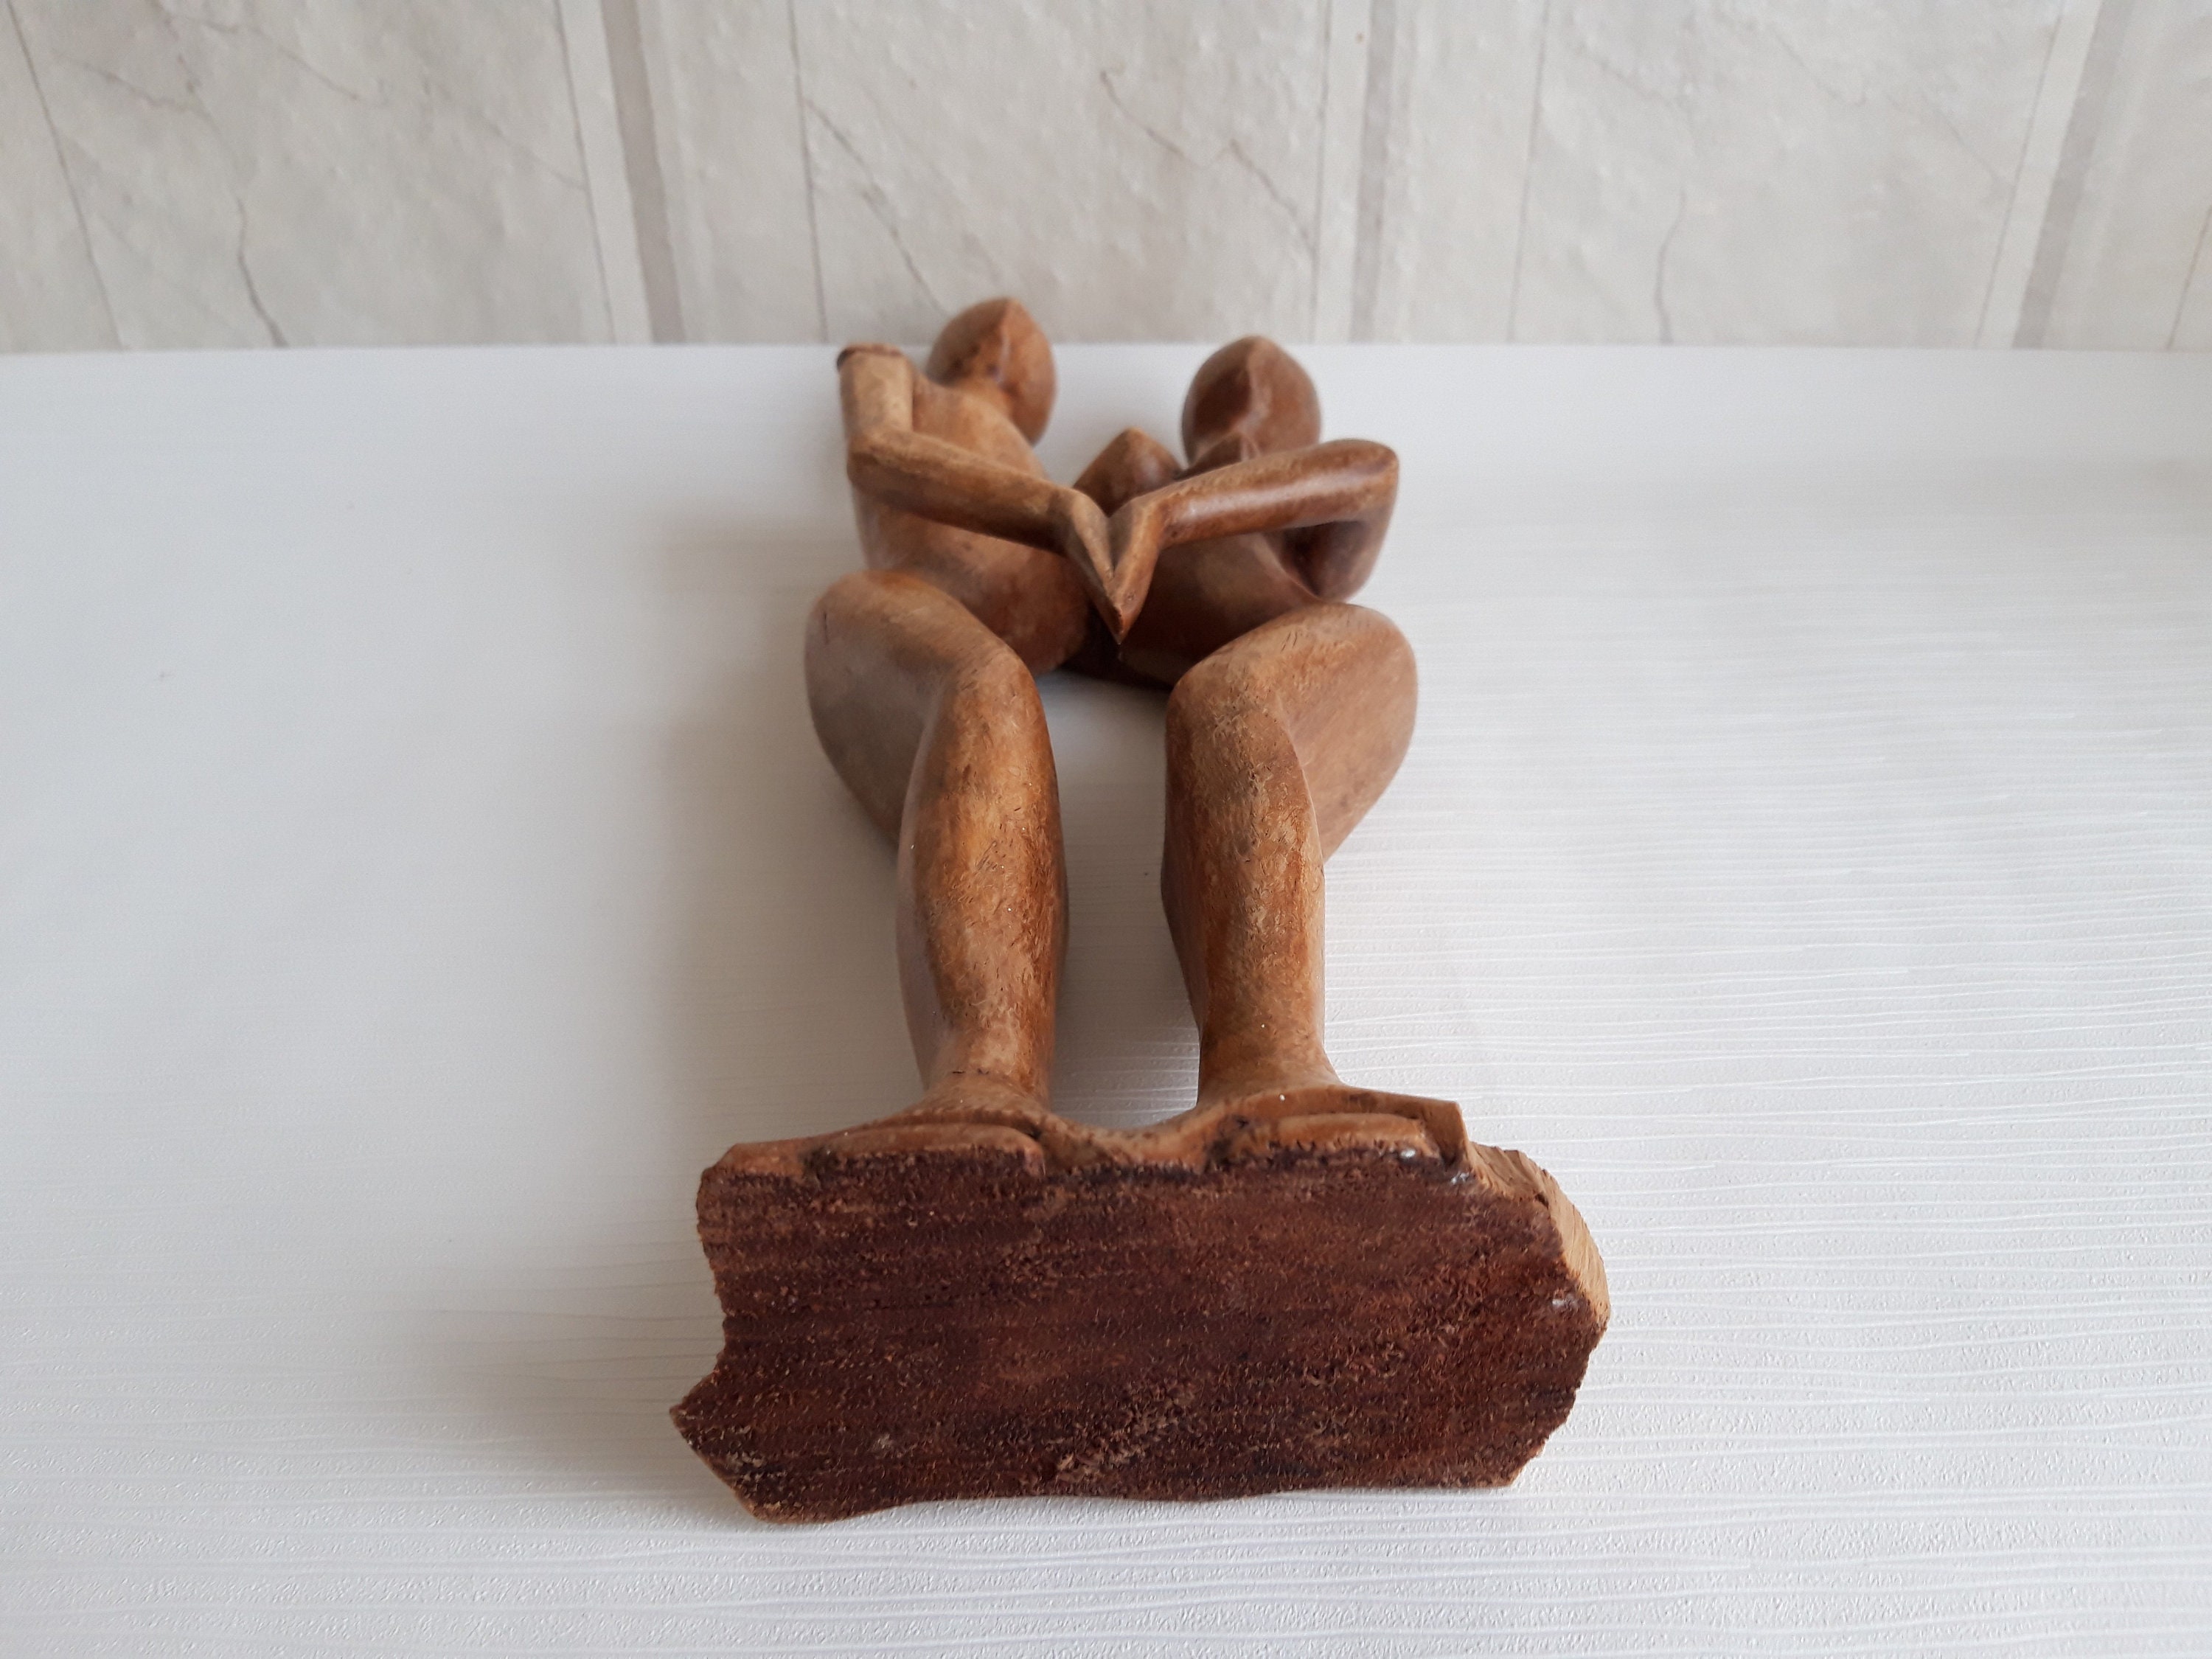 Vintage Wood Carving Statue, Wooden Sculpture, Wood Kissing Couple ...